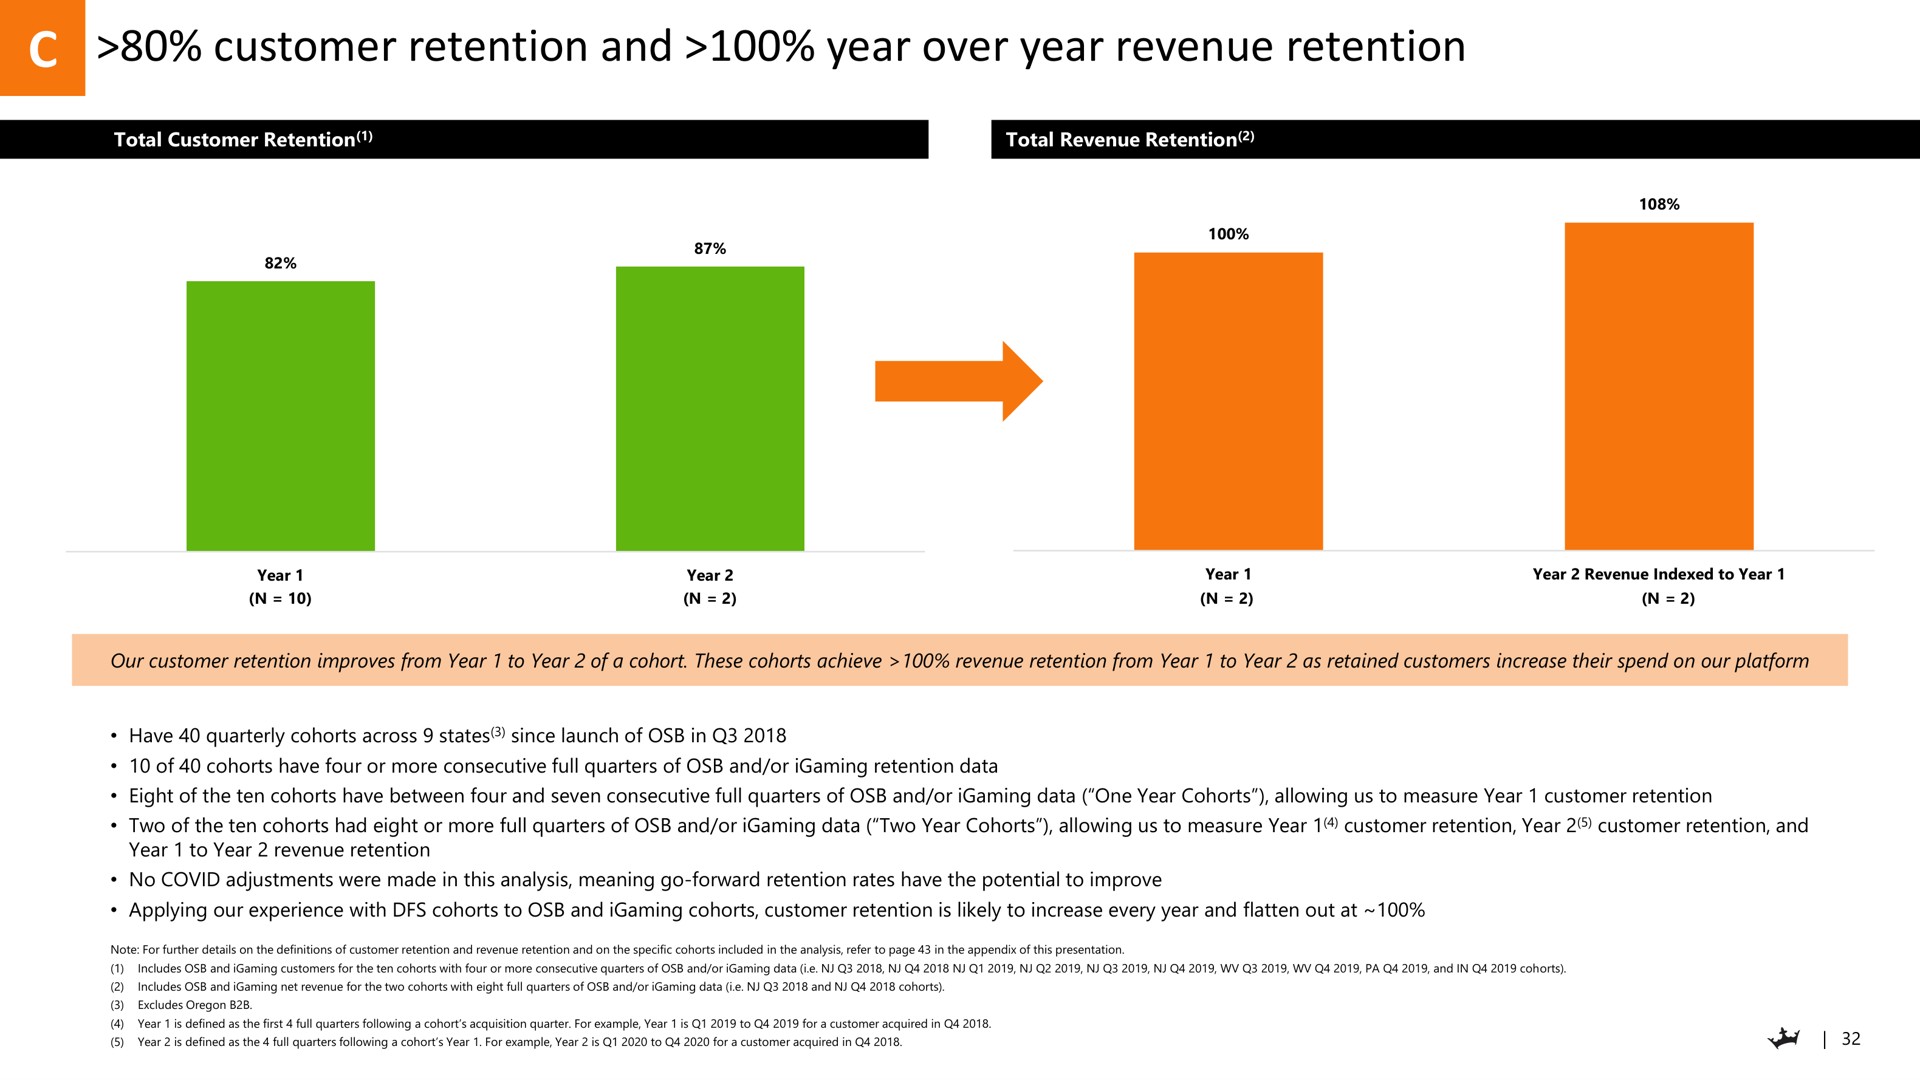 customer retention and year over year revenue retention | DraftKings